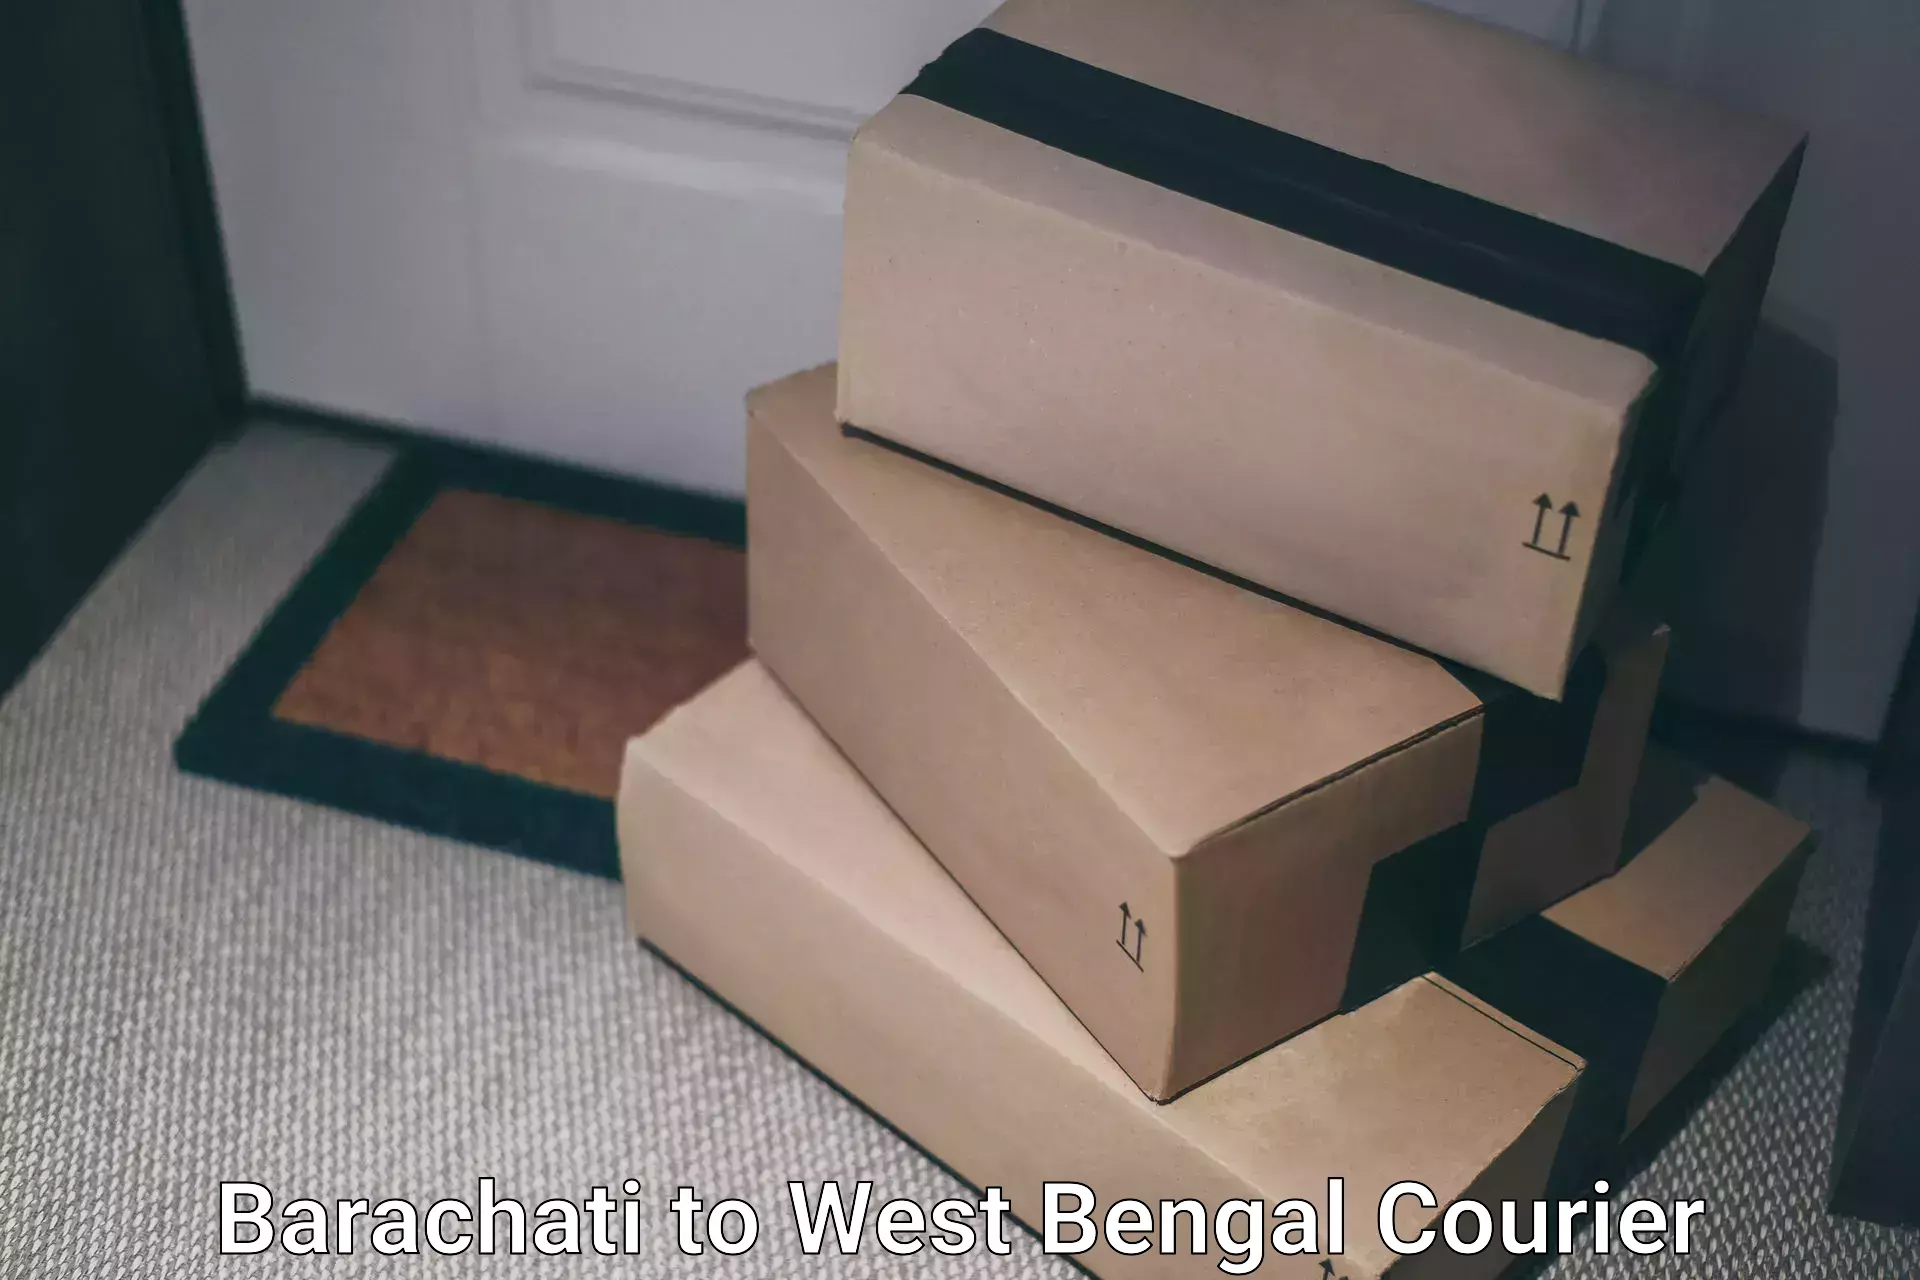 Courier insurance in Barachati to West Bengal